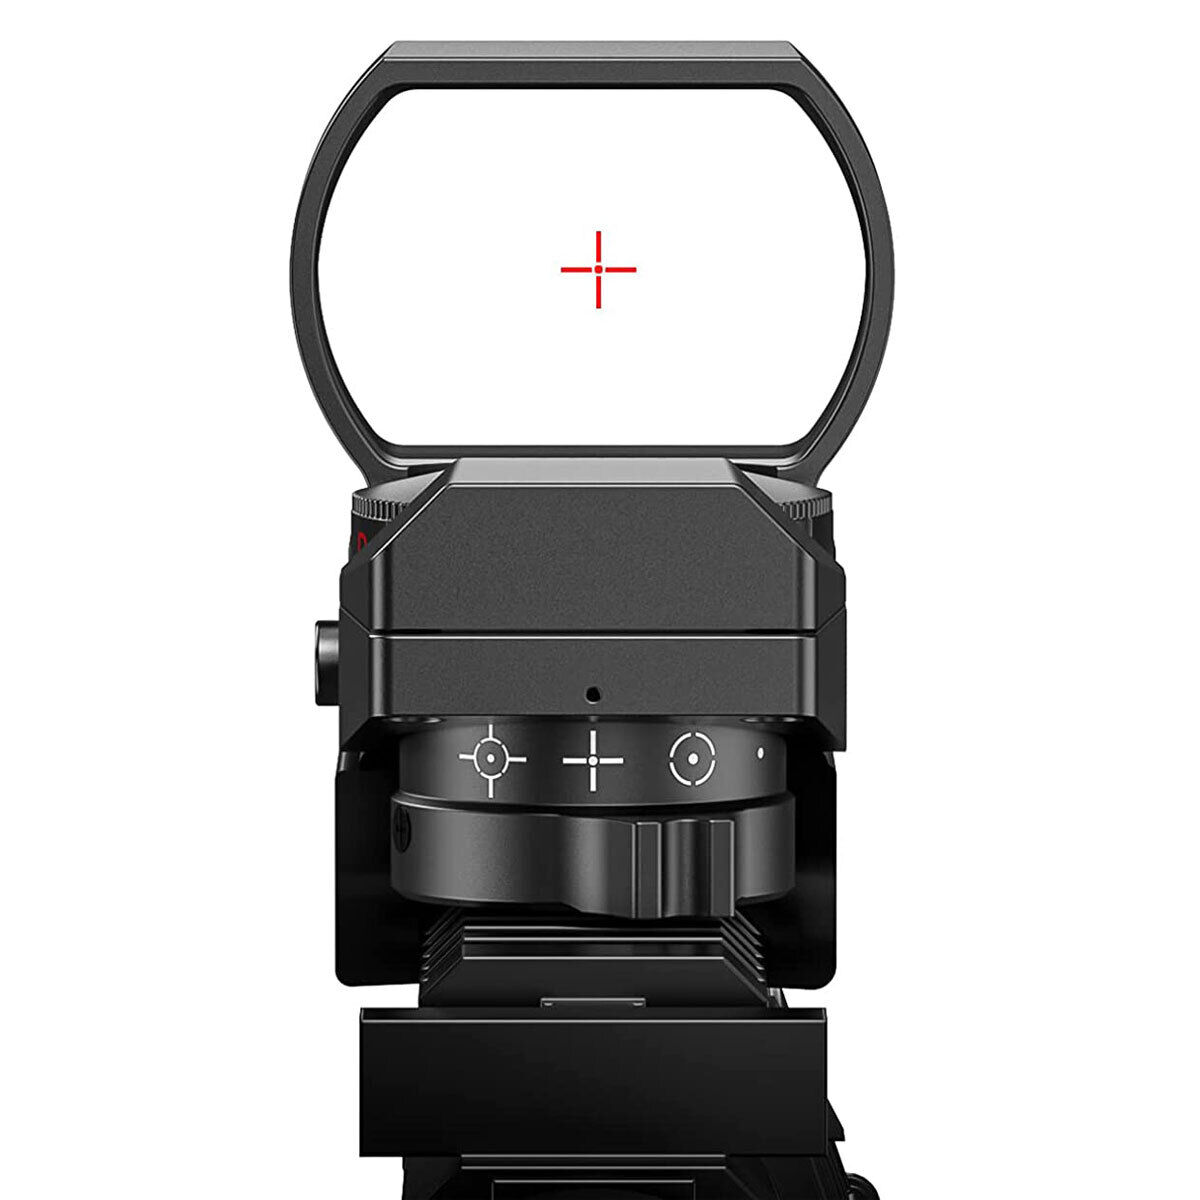 Tactical Holographic Reflex Red Green Dot Sight 4 Type Reticle for 20mm Rails US